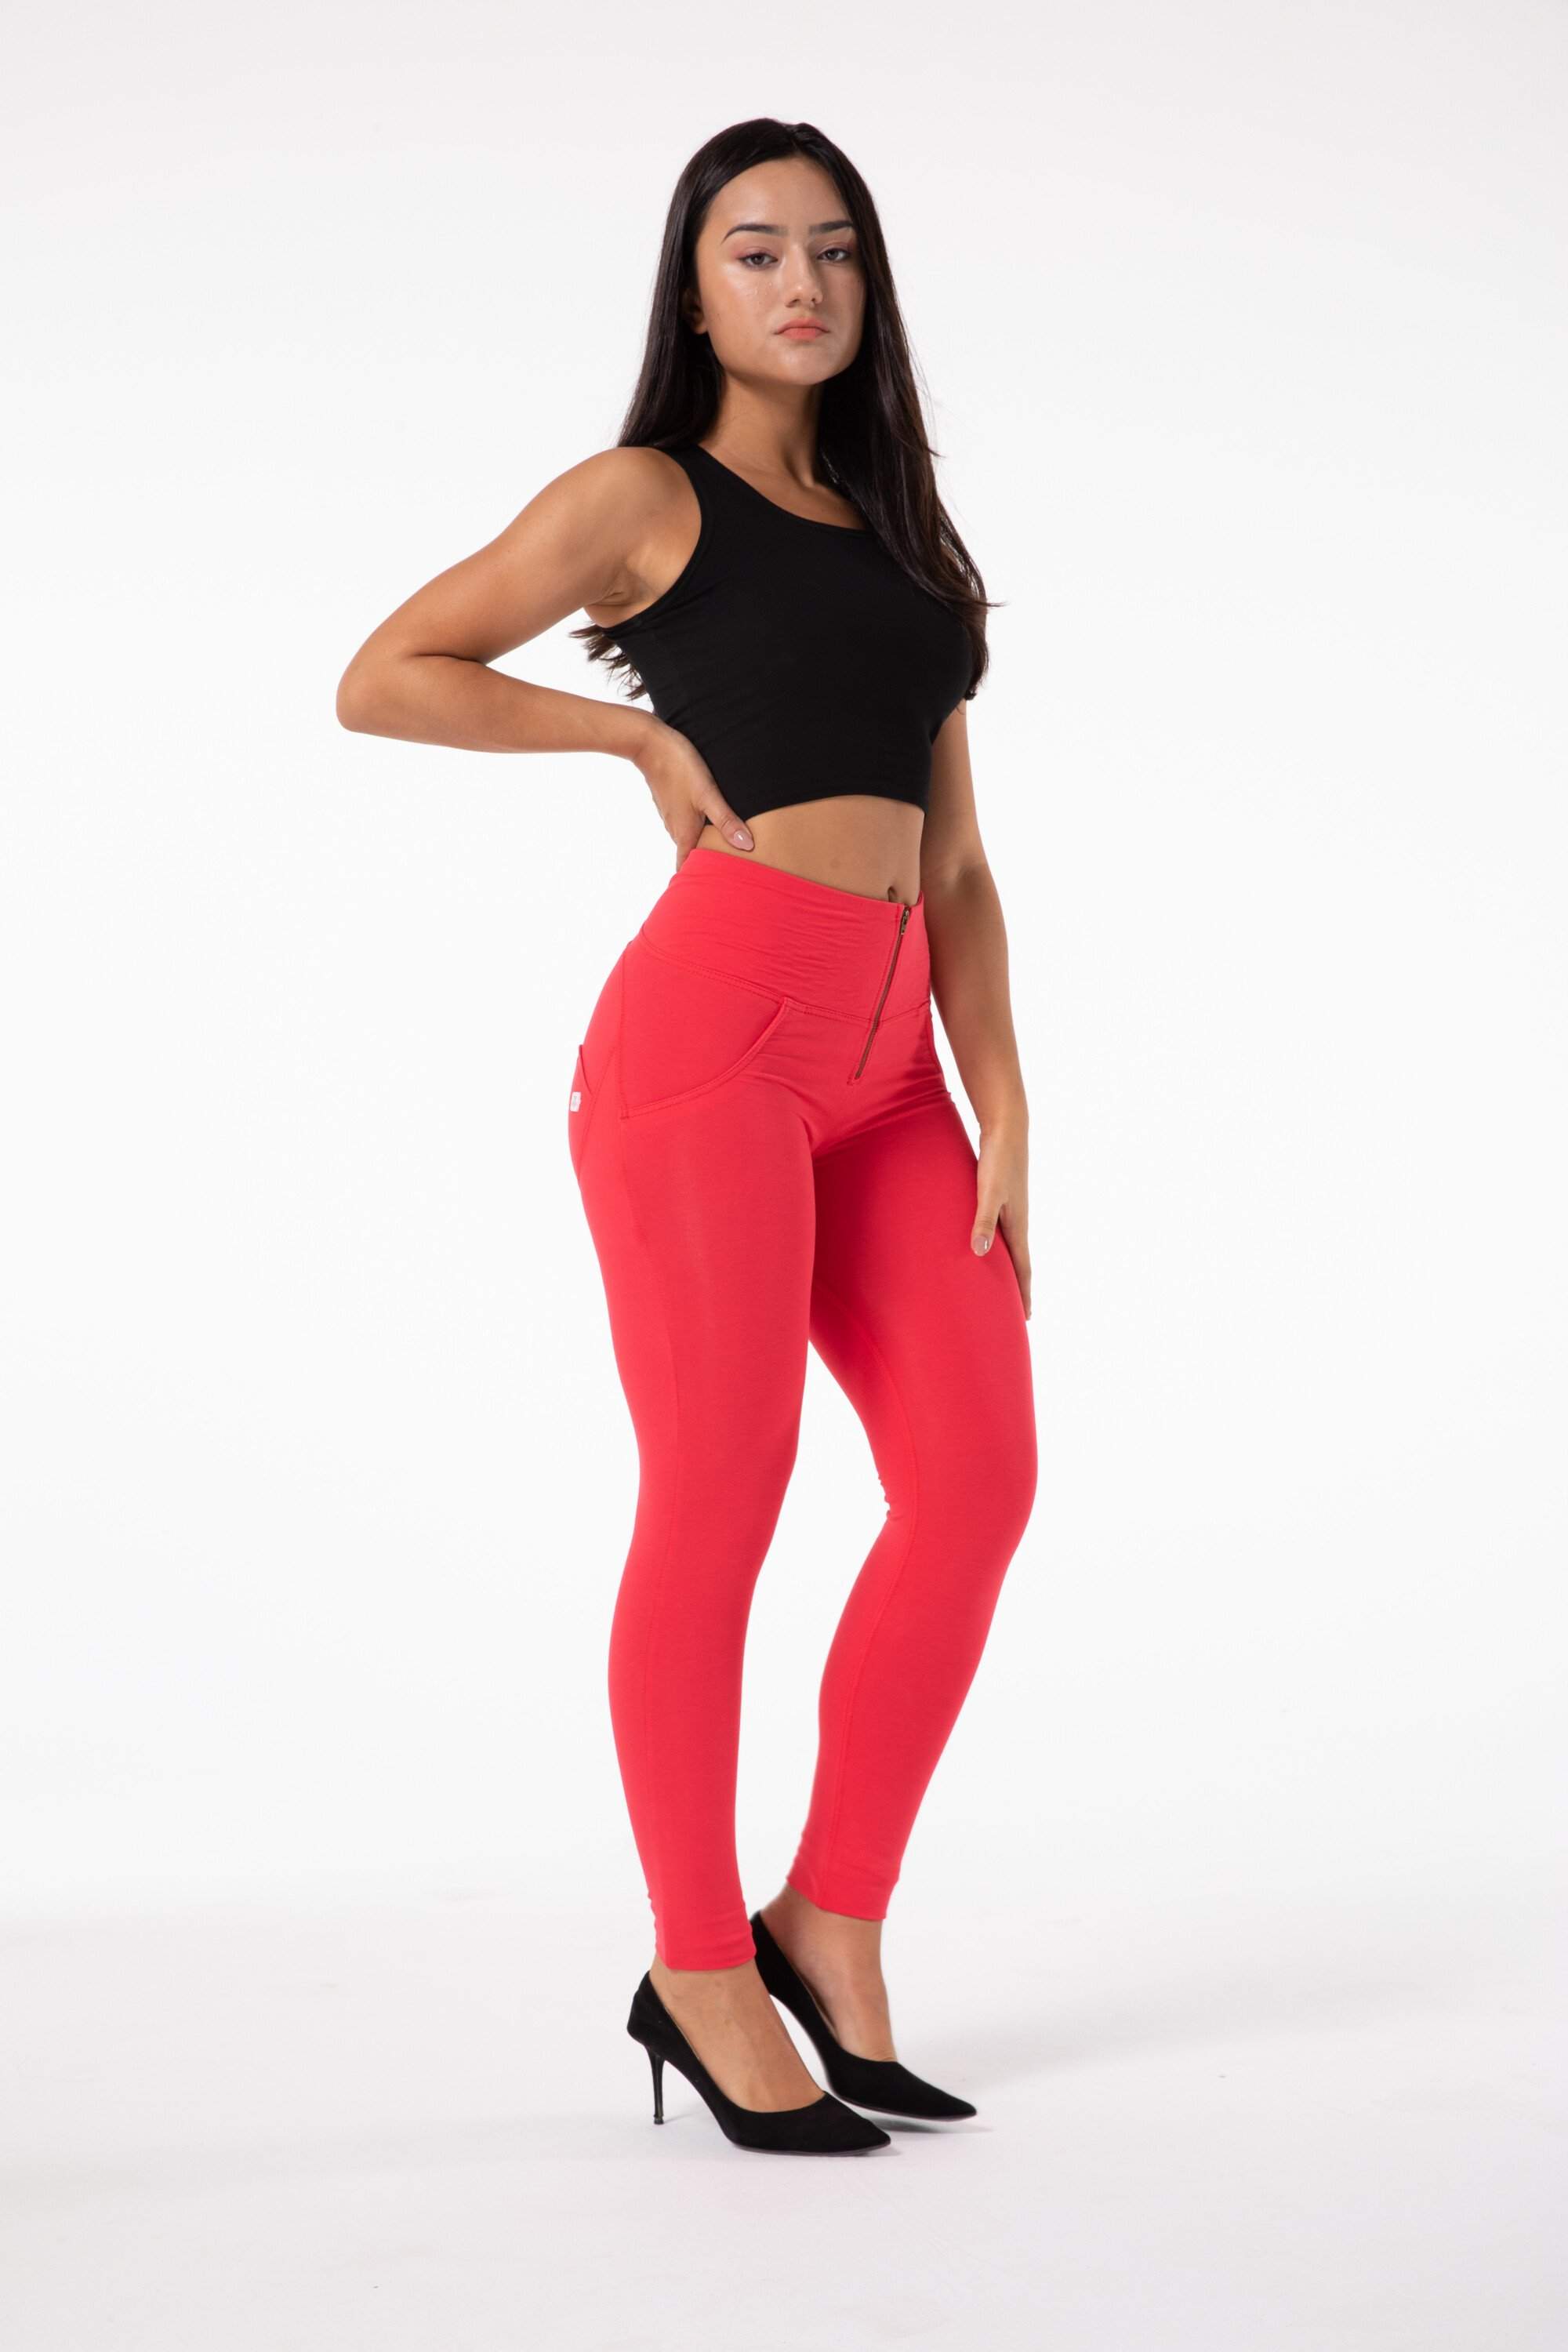 The Audacity Zipped Watermelon Red Leggings Watermelon red for women